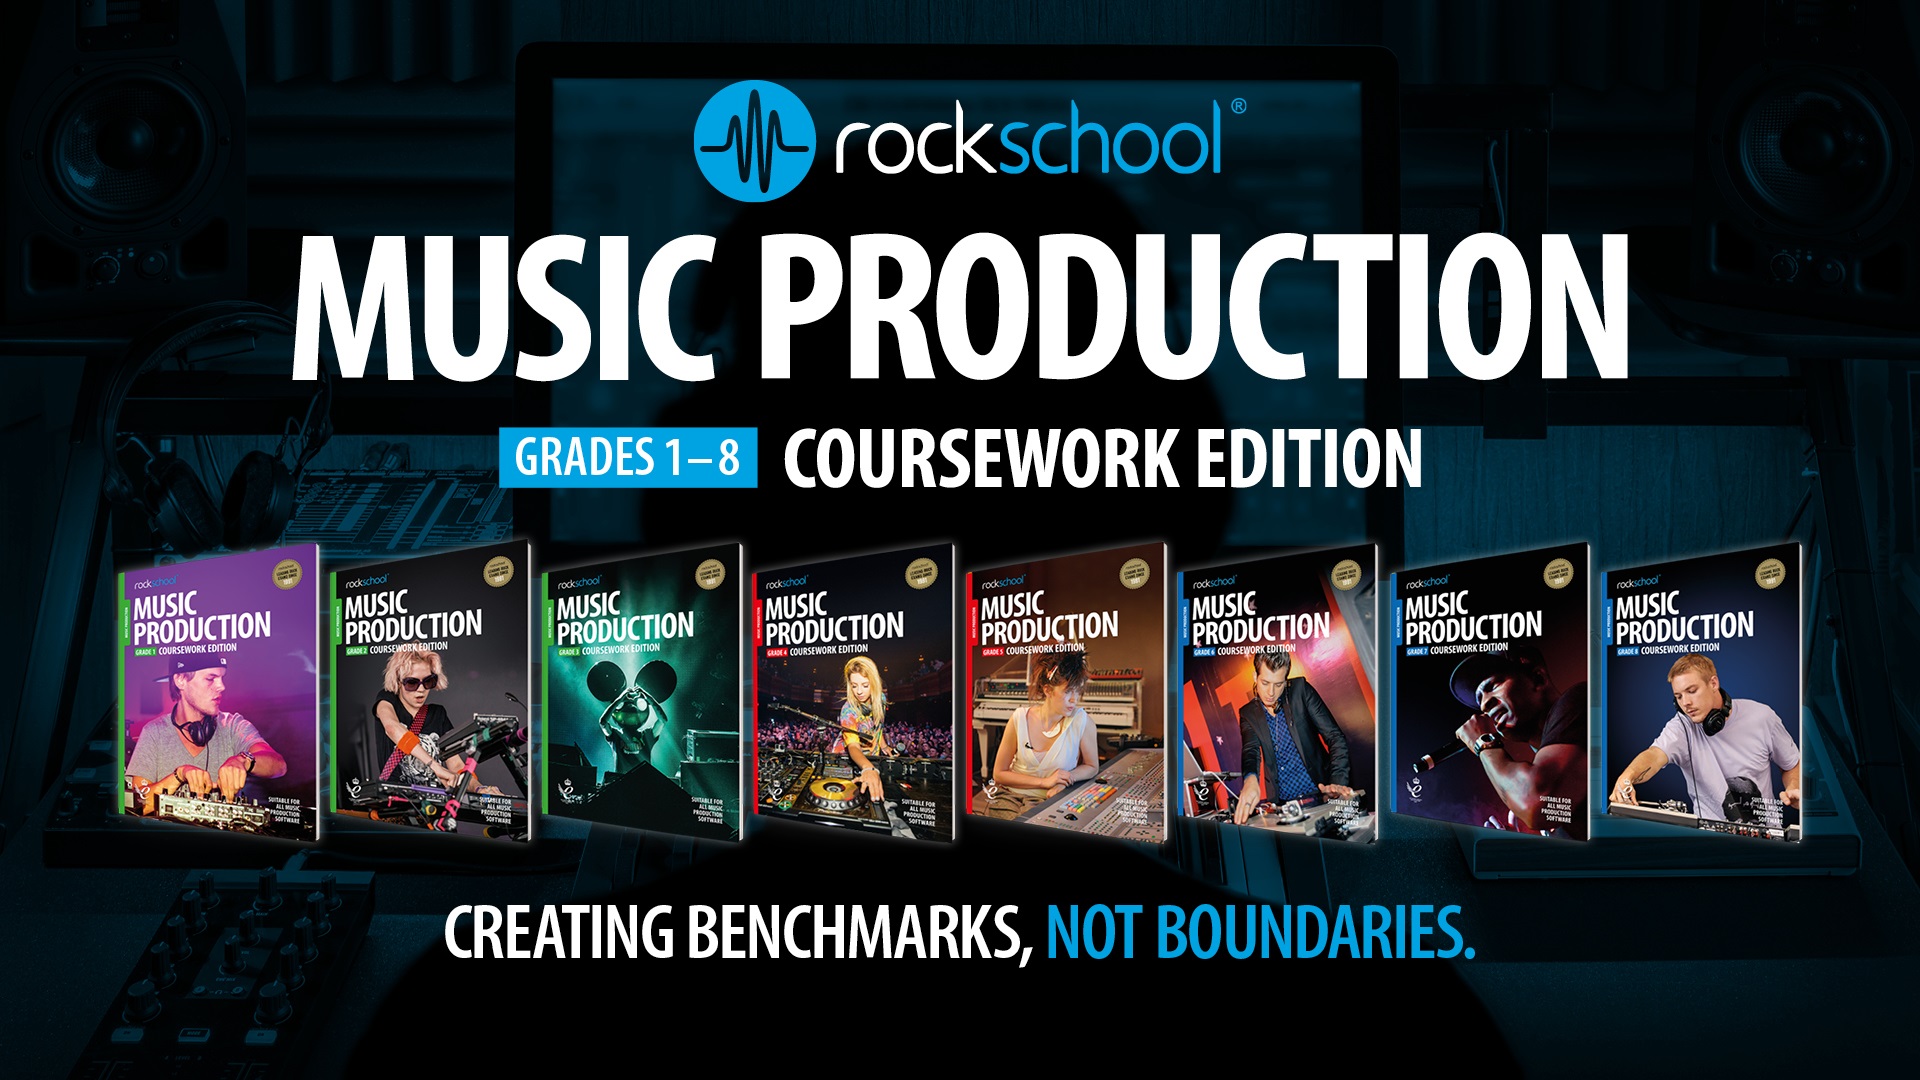 Music Production book covers